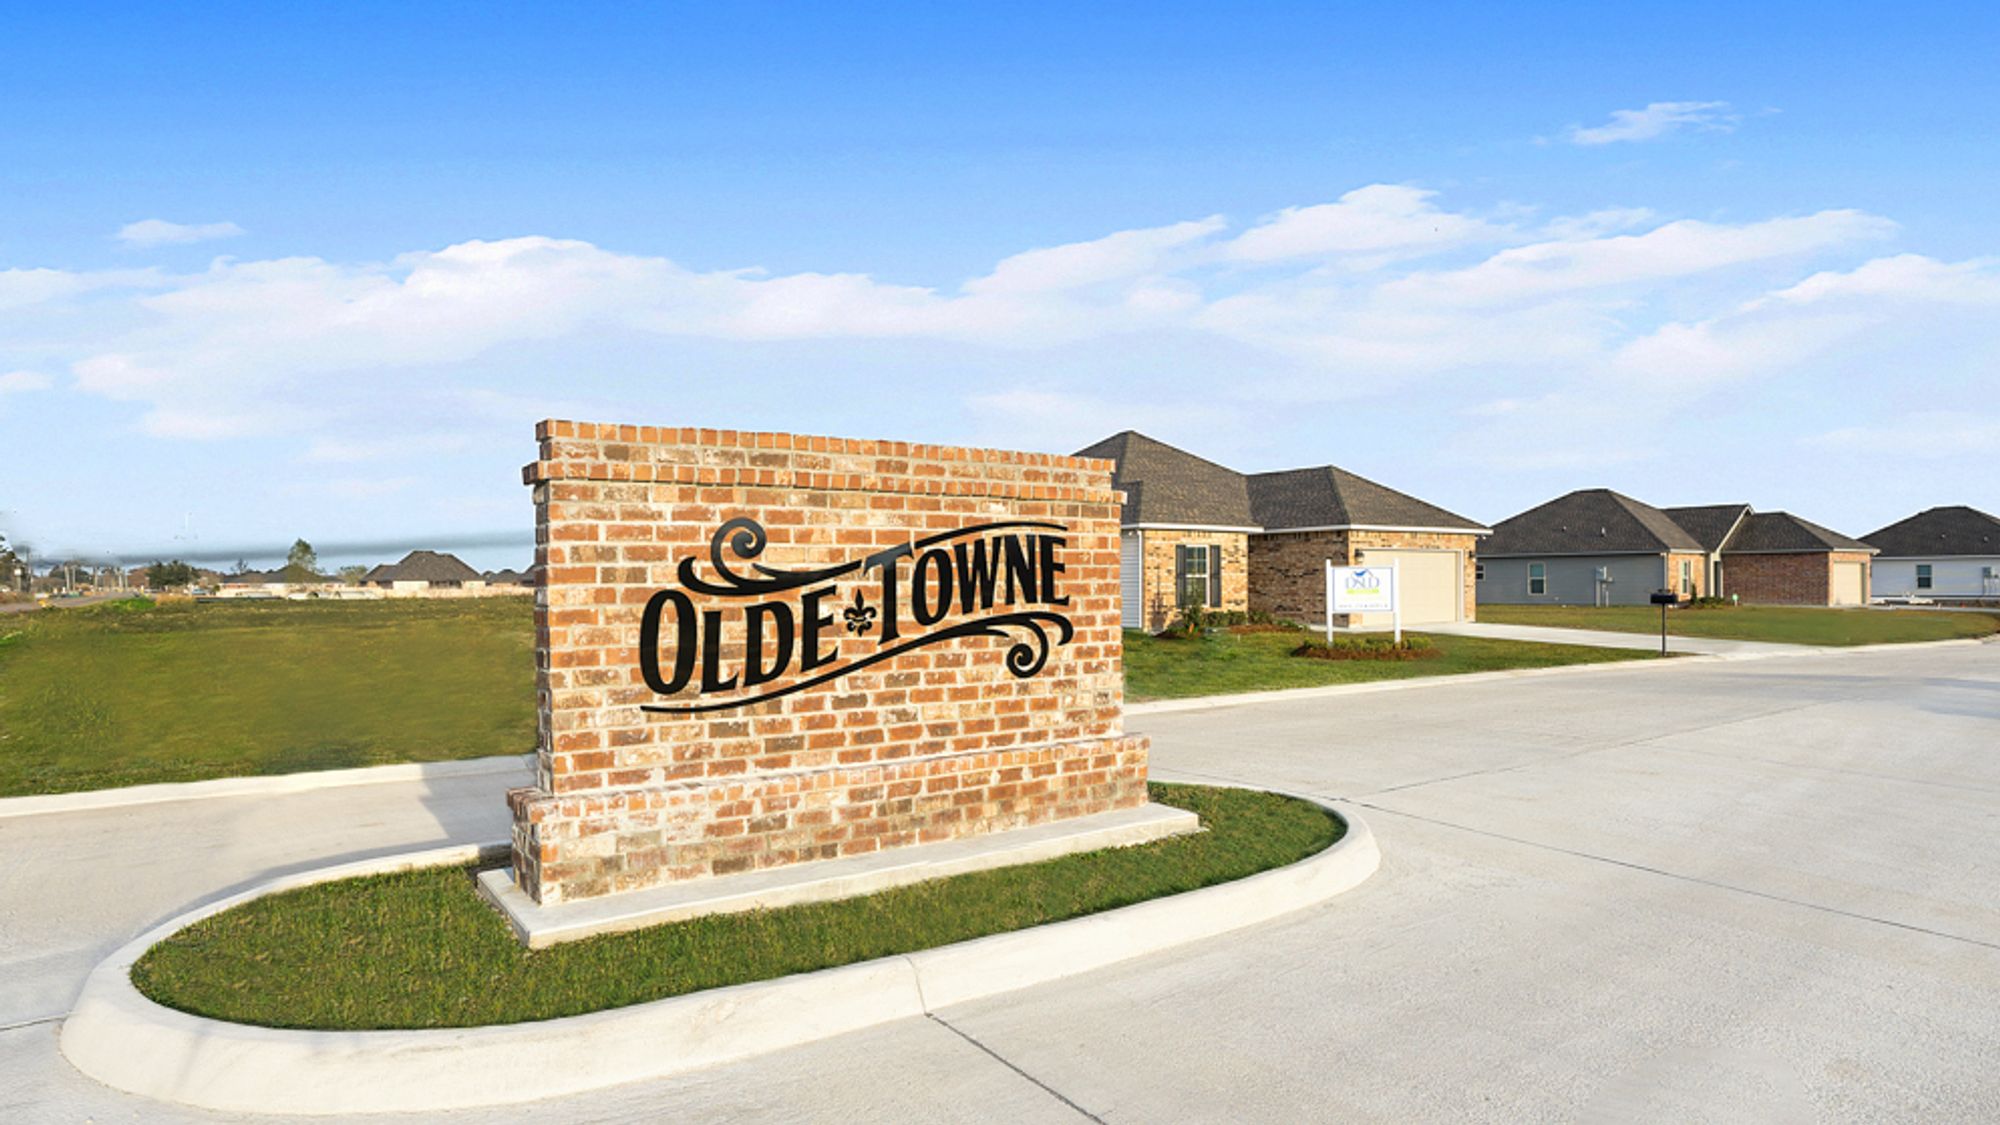 new construction homes in thibodaux la in dsld homes